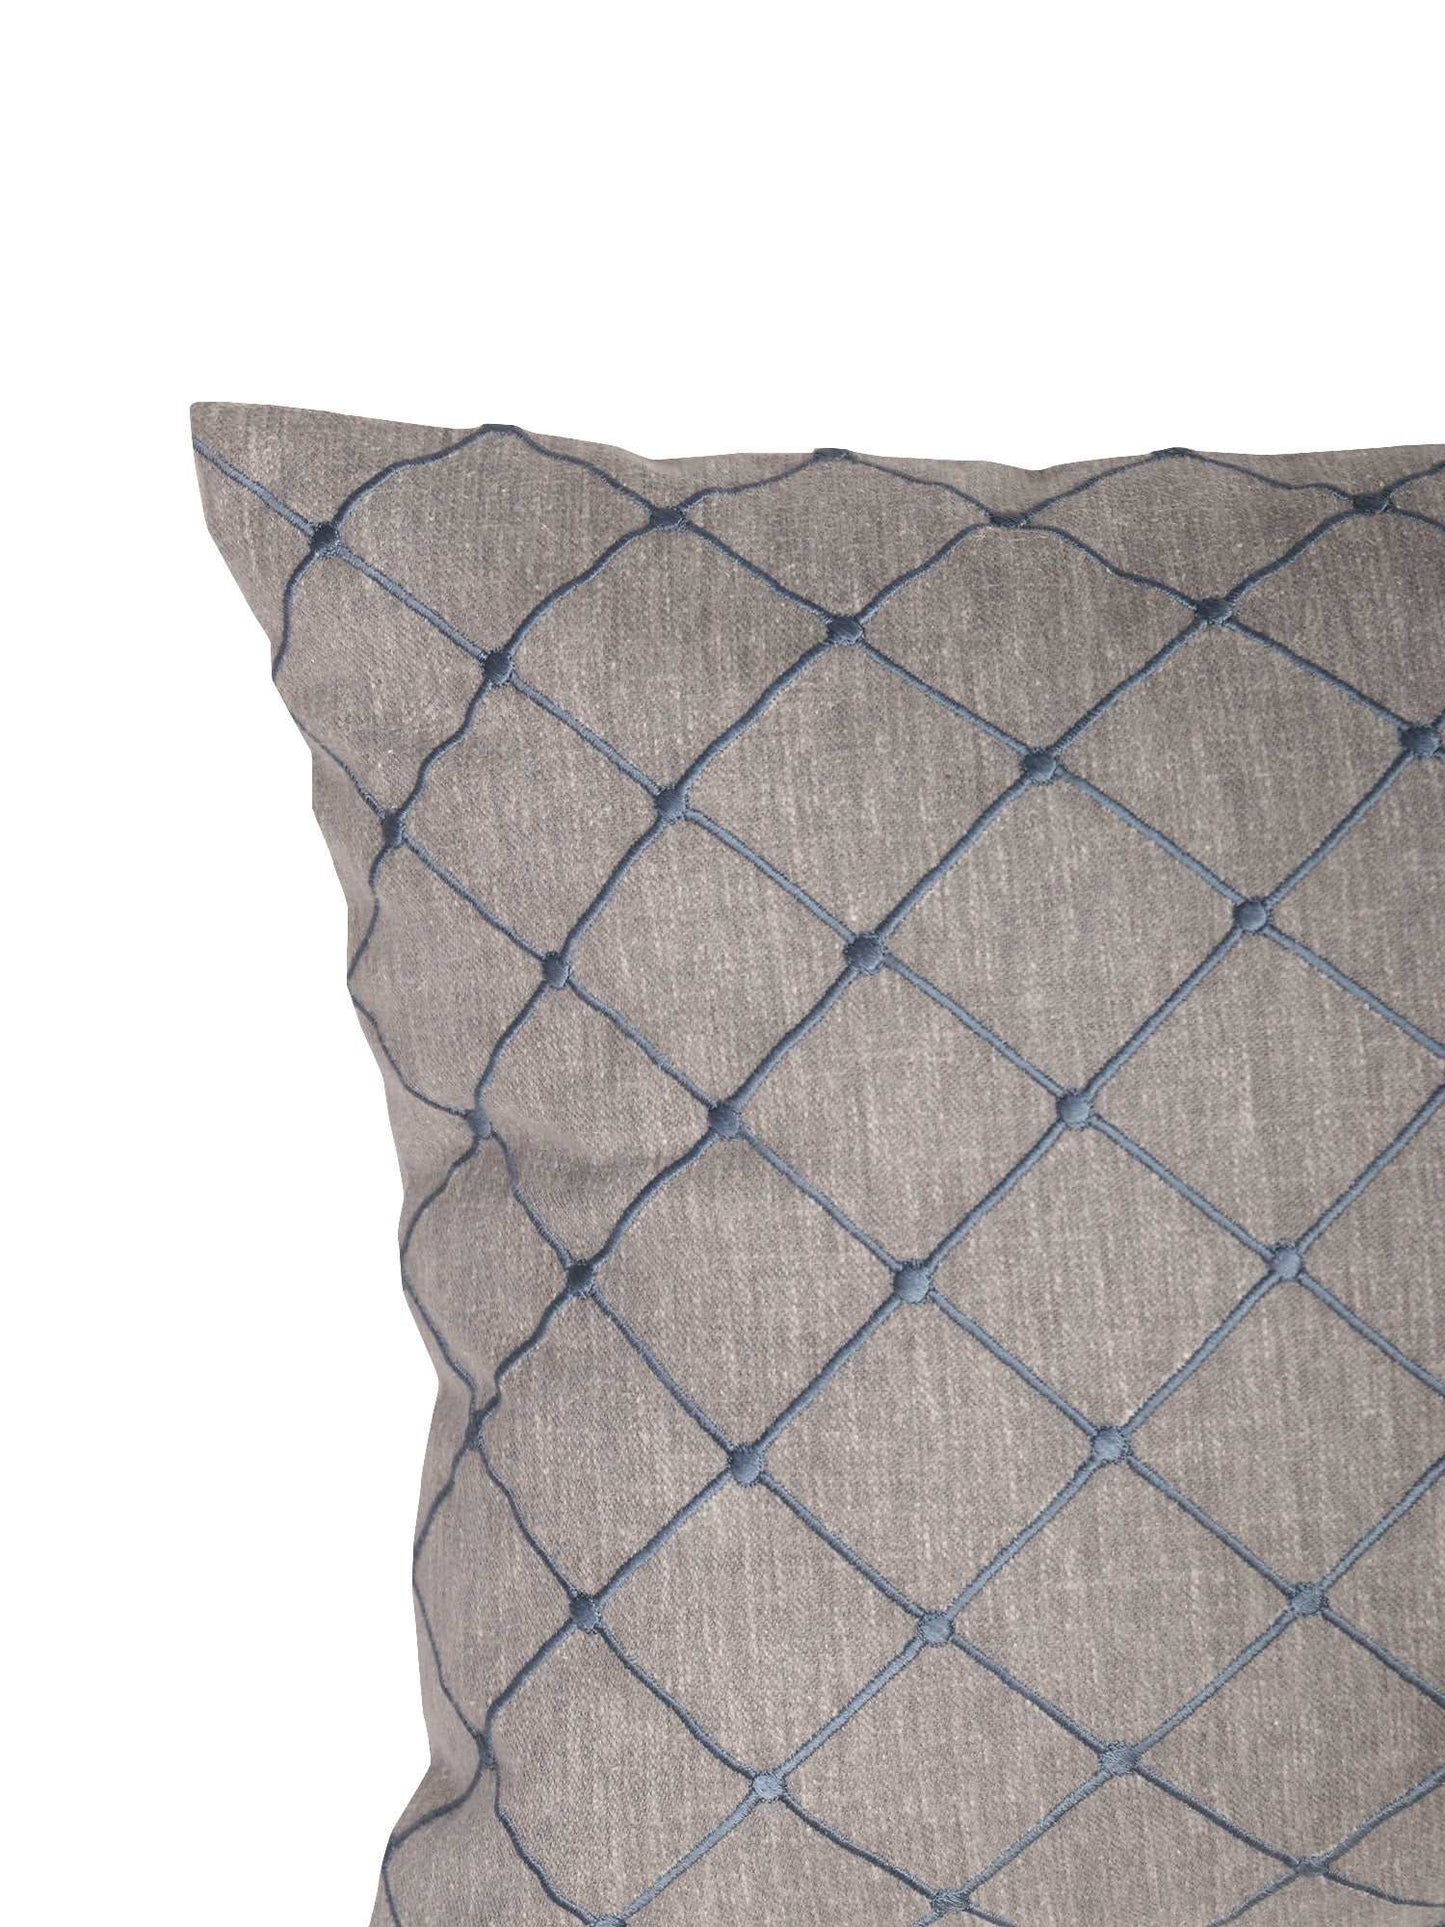 Cushion Cover Cotton Patchwork with Pleats and Embroidery of Checks - 12inches X 22inches